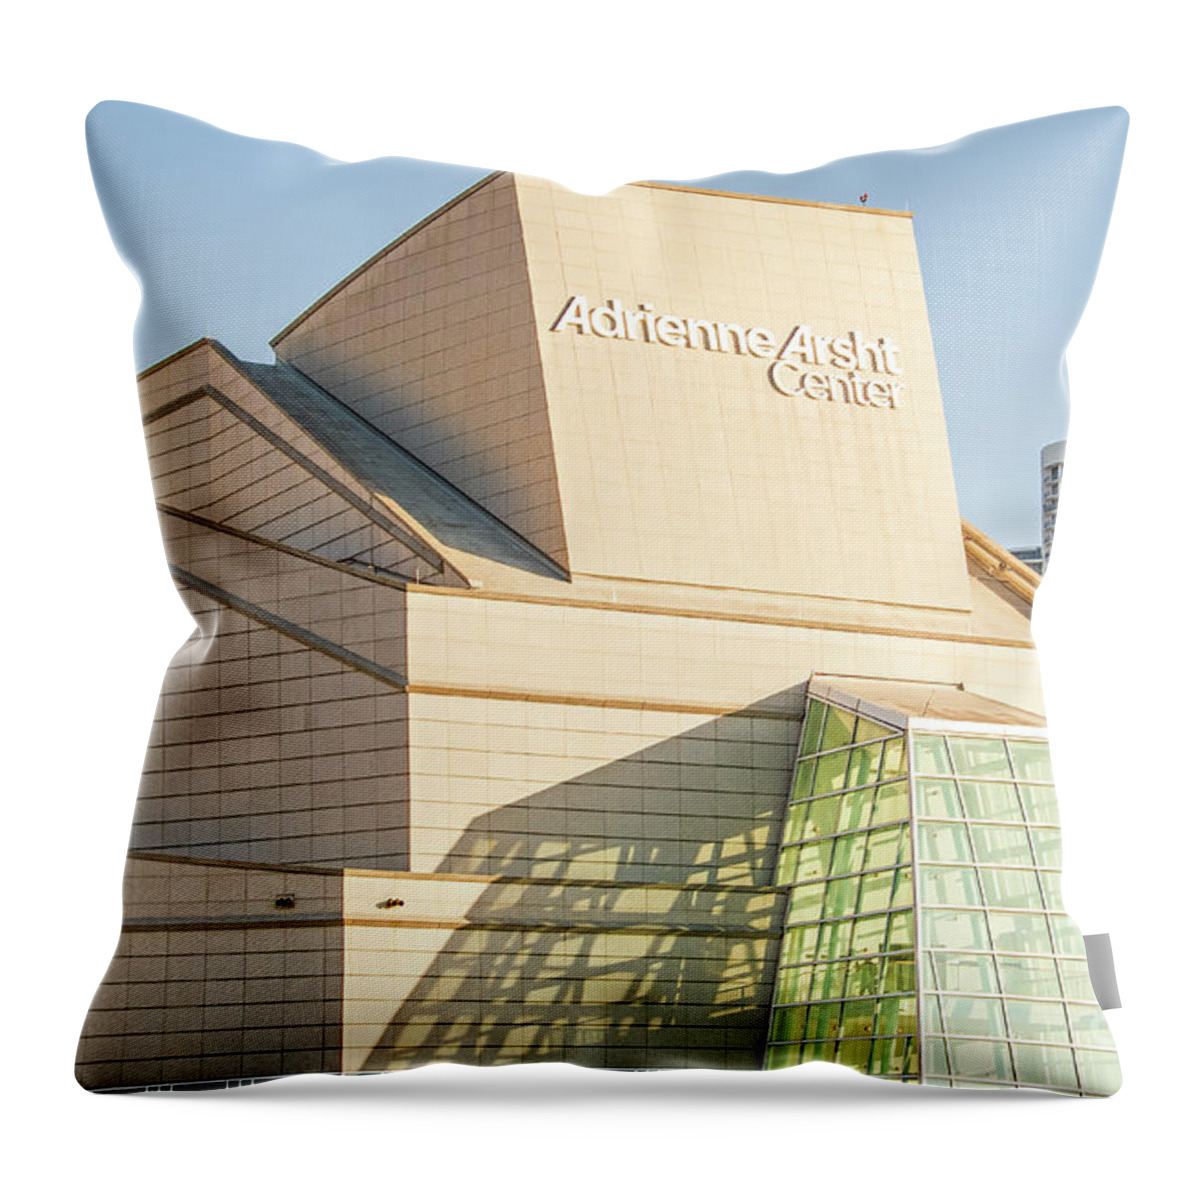 Adrienne Arsht Center For The Performing Arts Of Miami-dade Coun Throw Pillow featuring the photograph Adrienne Arsht Center for the Performing Arts of Miami-Dade Coun #1 by David Oppenheimer